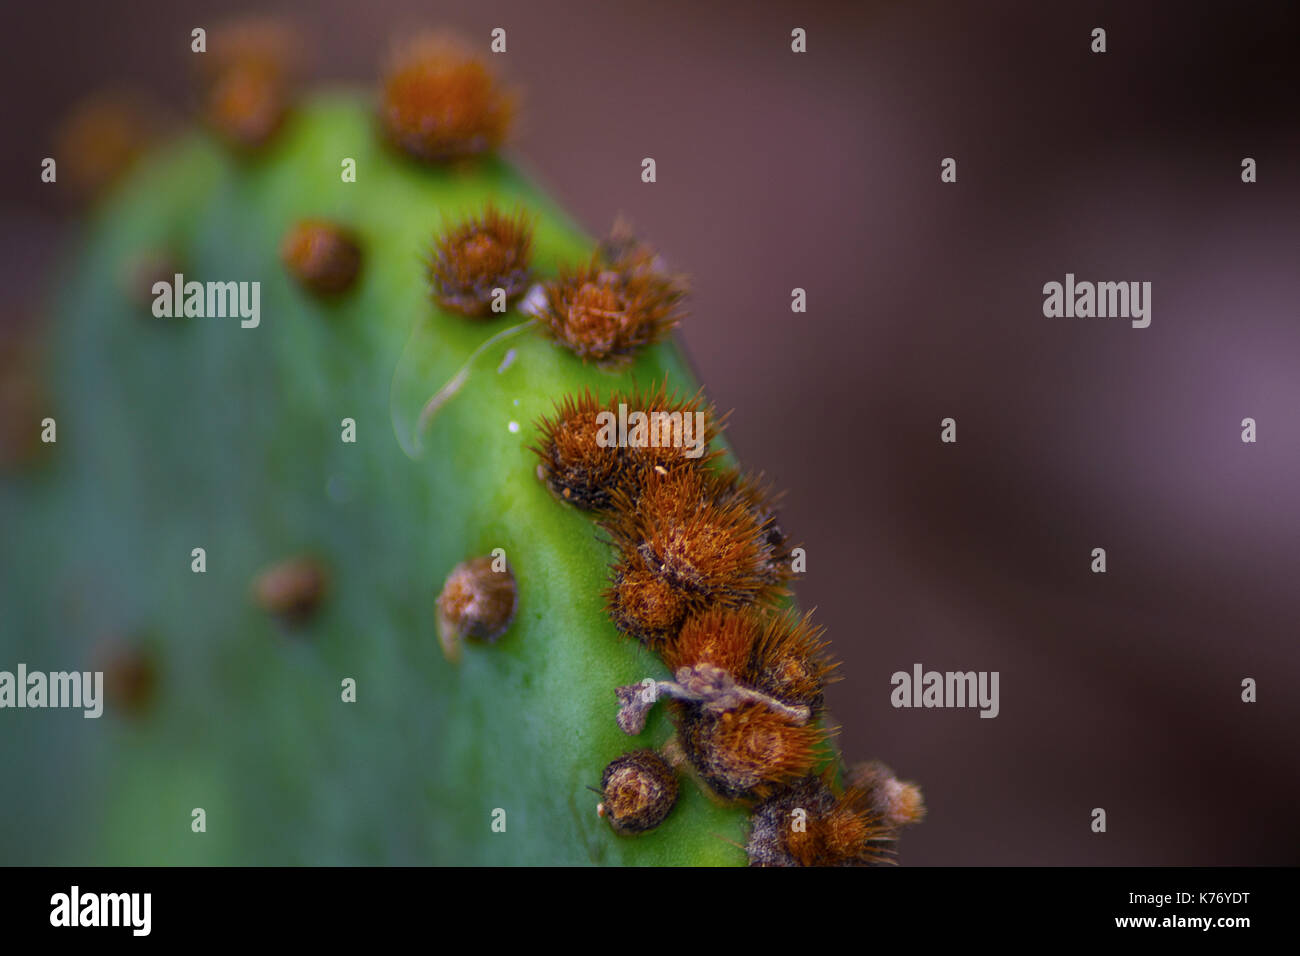 Macro photo of a Prickly Pear Cactus with small needles taken at Lake Mineral Wells State Park in Texas. Stock Photo